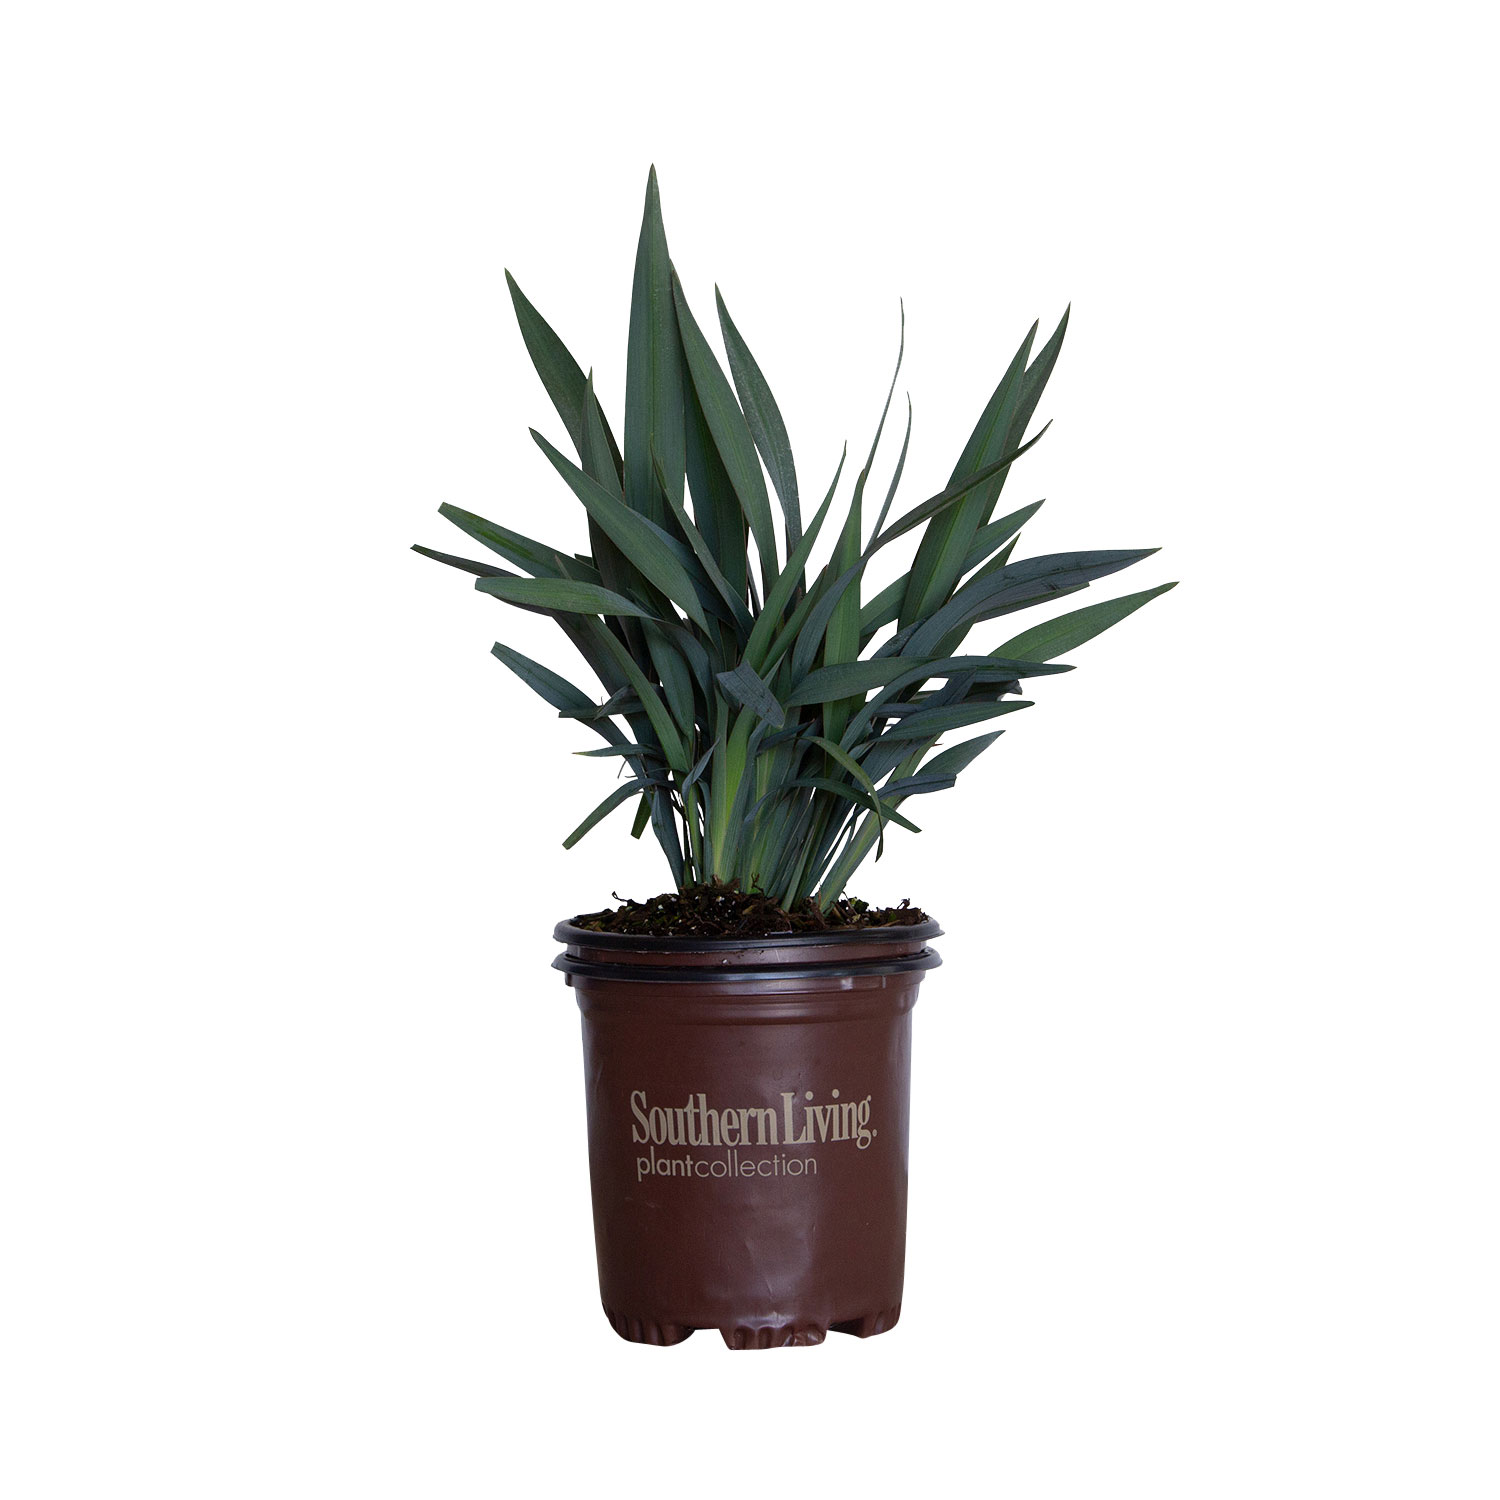 Clarity Blue Dianella 'Flax Lily' (2.5 Quart) Evergreen Ornamental Grass with Blue Foliage - image 1 of 6